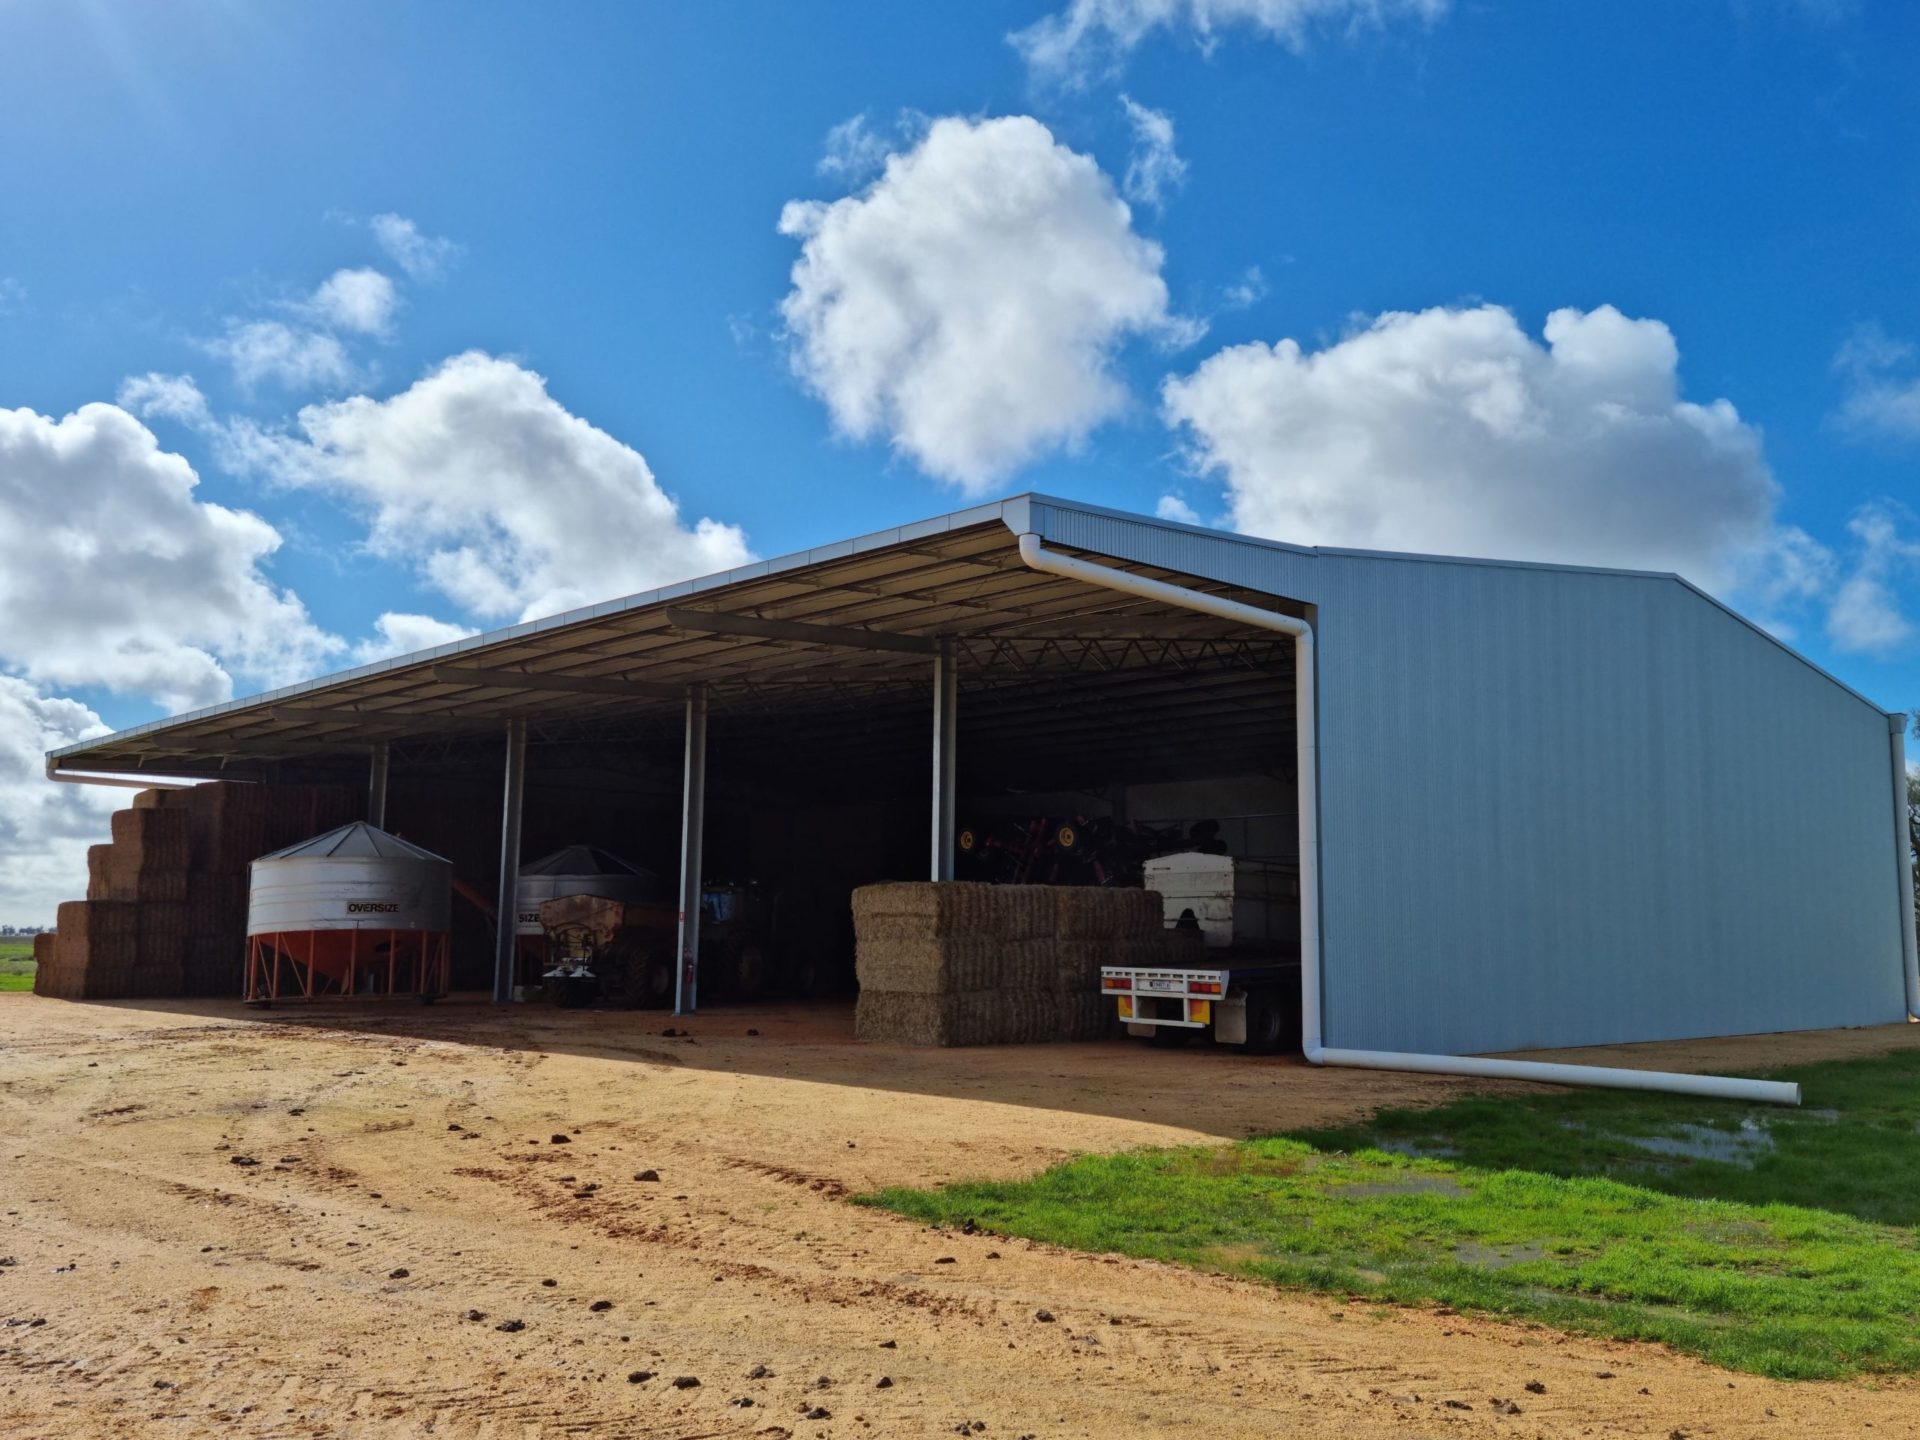 You are currently viewing A 42.5m x 24m x 7.5m open-front hay shed with 6 metre canopy